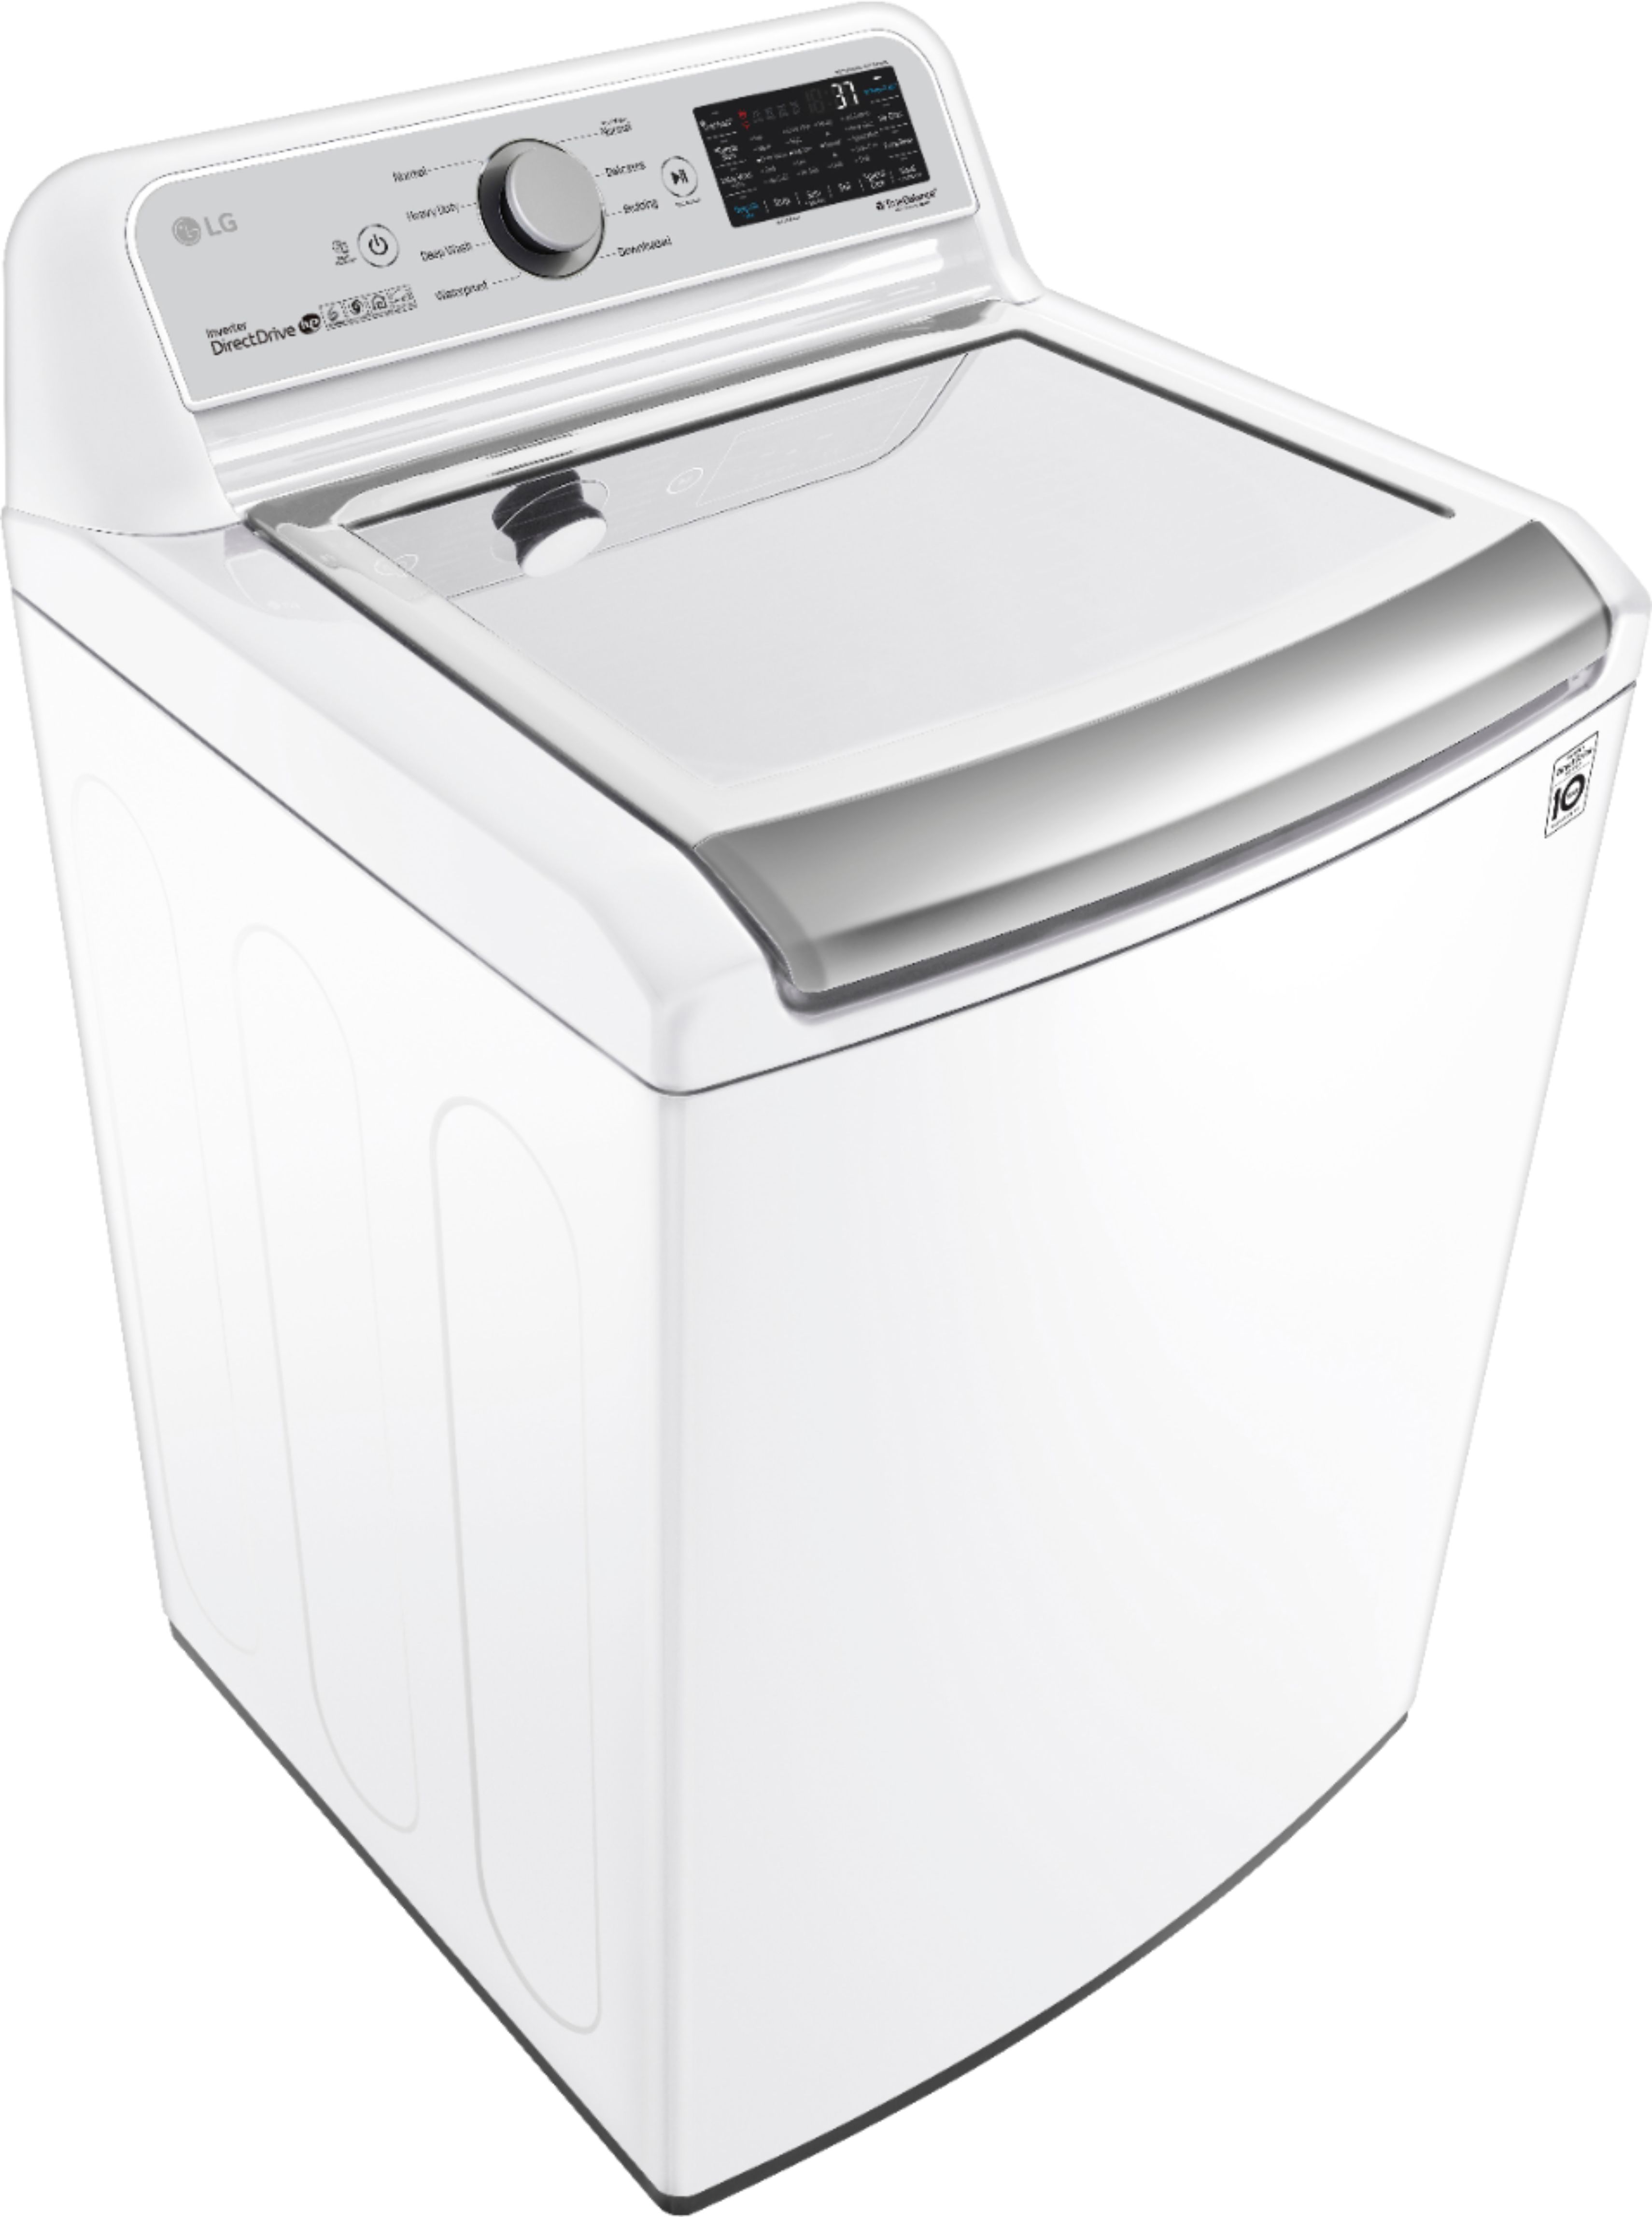 Angle View: LG - 4.8 Cu. Ft. High-Efficiency Top Load Washer with 4-Way Agitator and TurboWash 3D - White